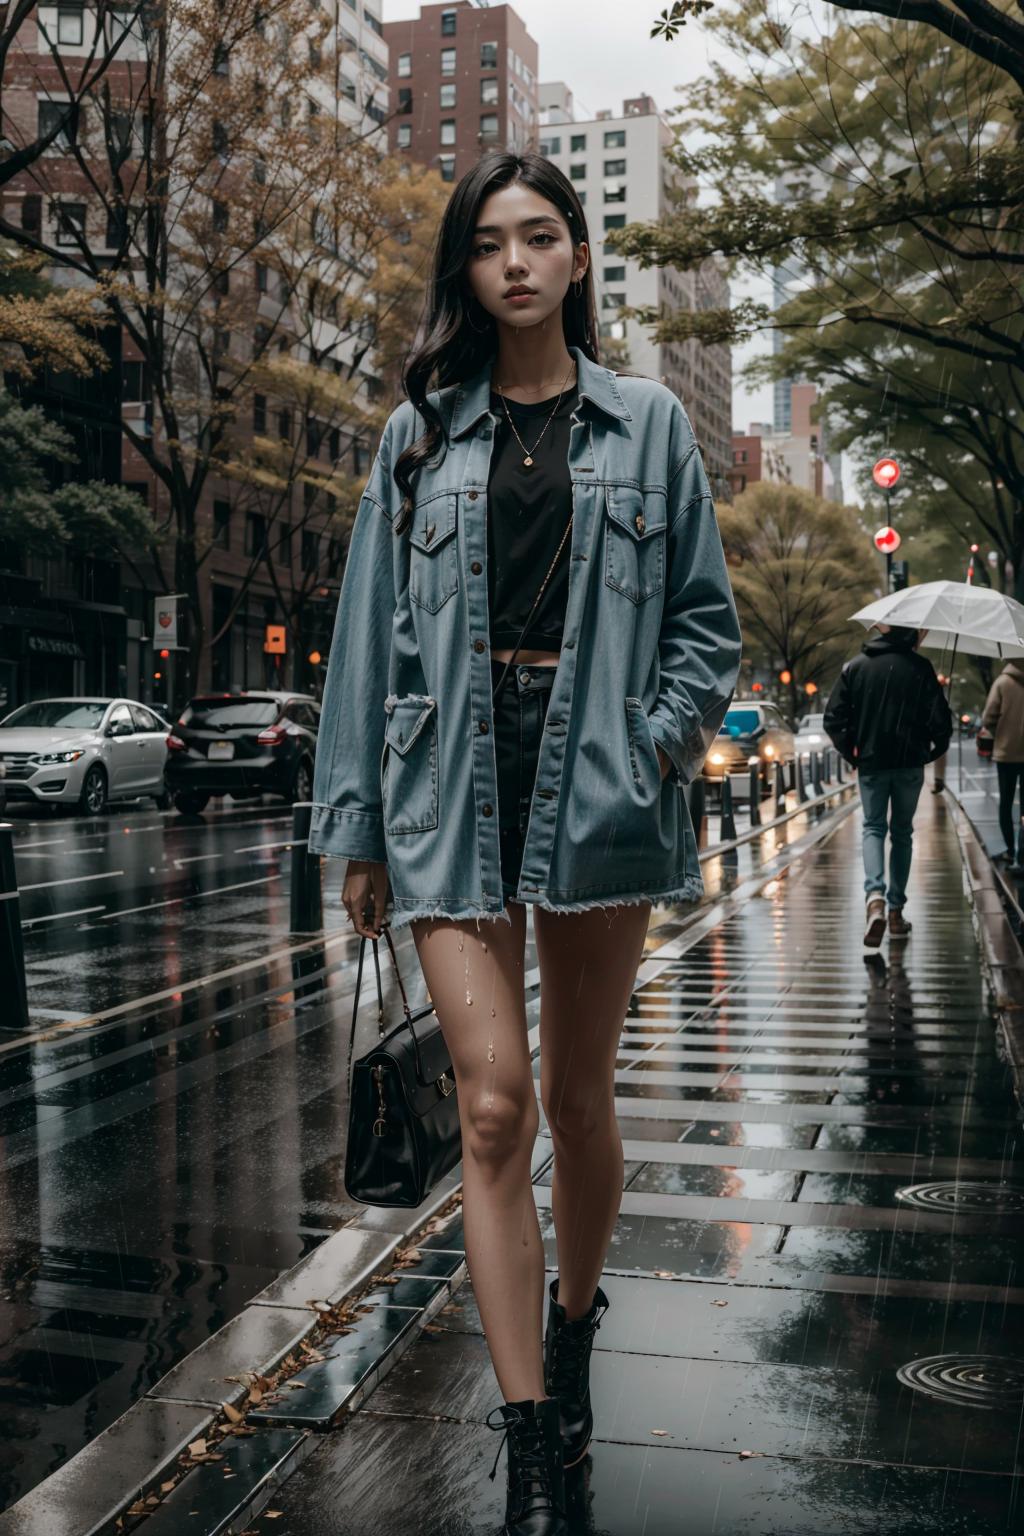 Woman in a blue jacket and jean shorts walking down a rain-soaked city street.